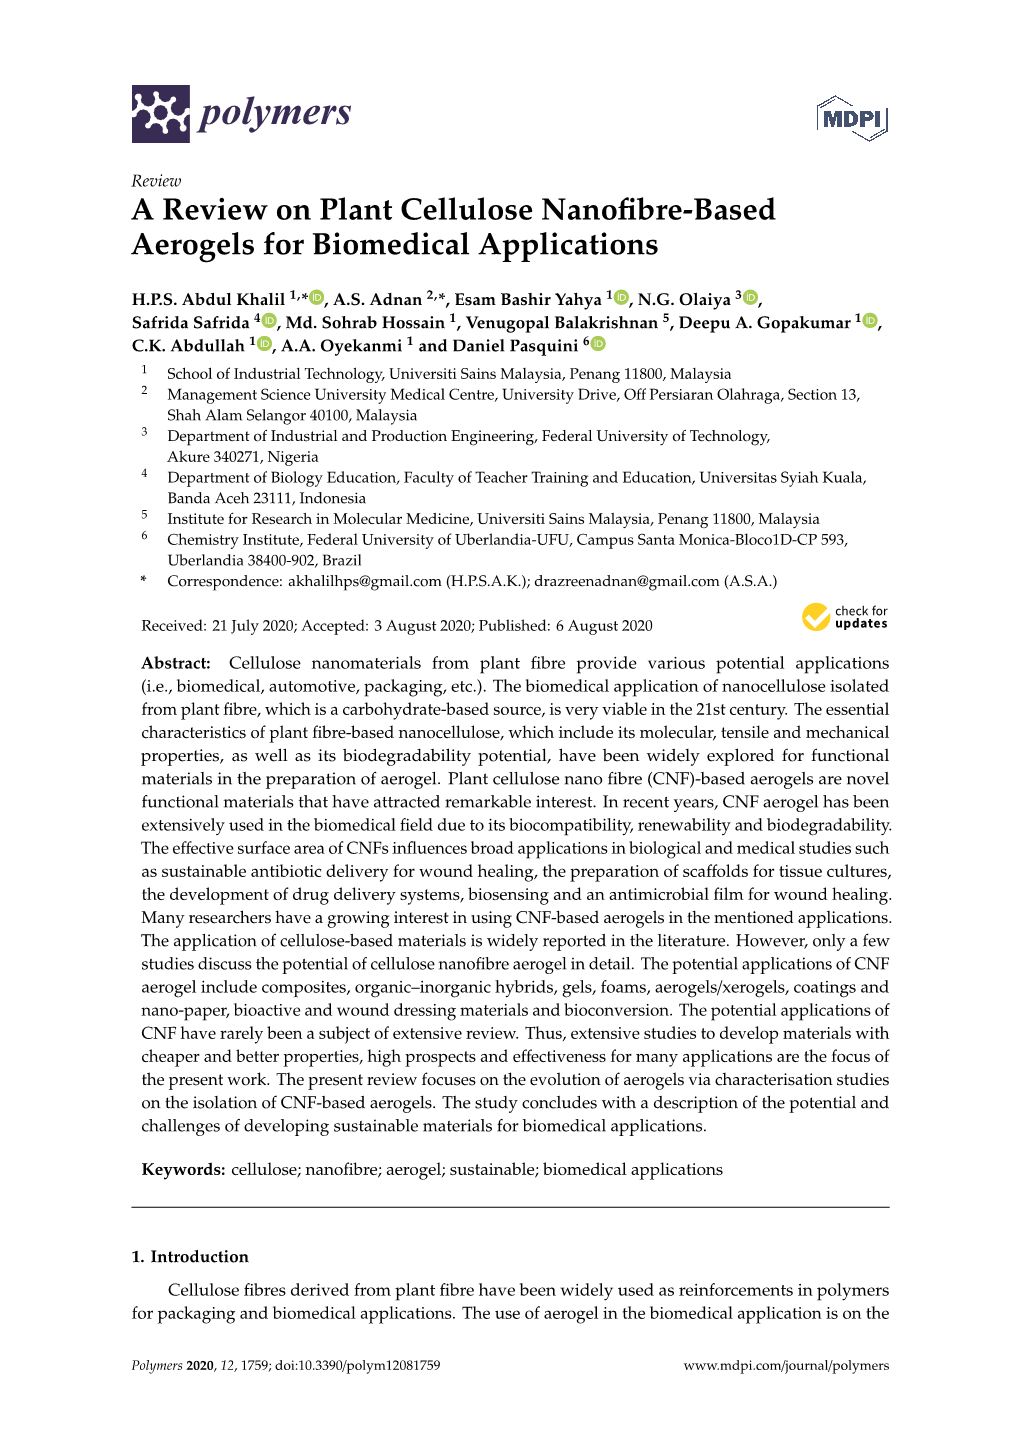 A Review on Plant Cellulose Nanofibre-Based Aerogels For